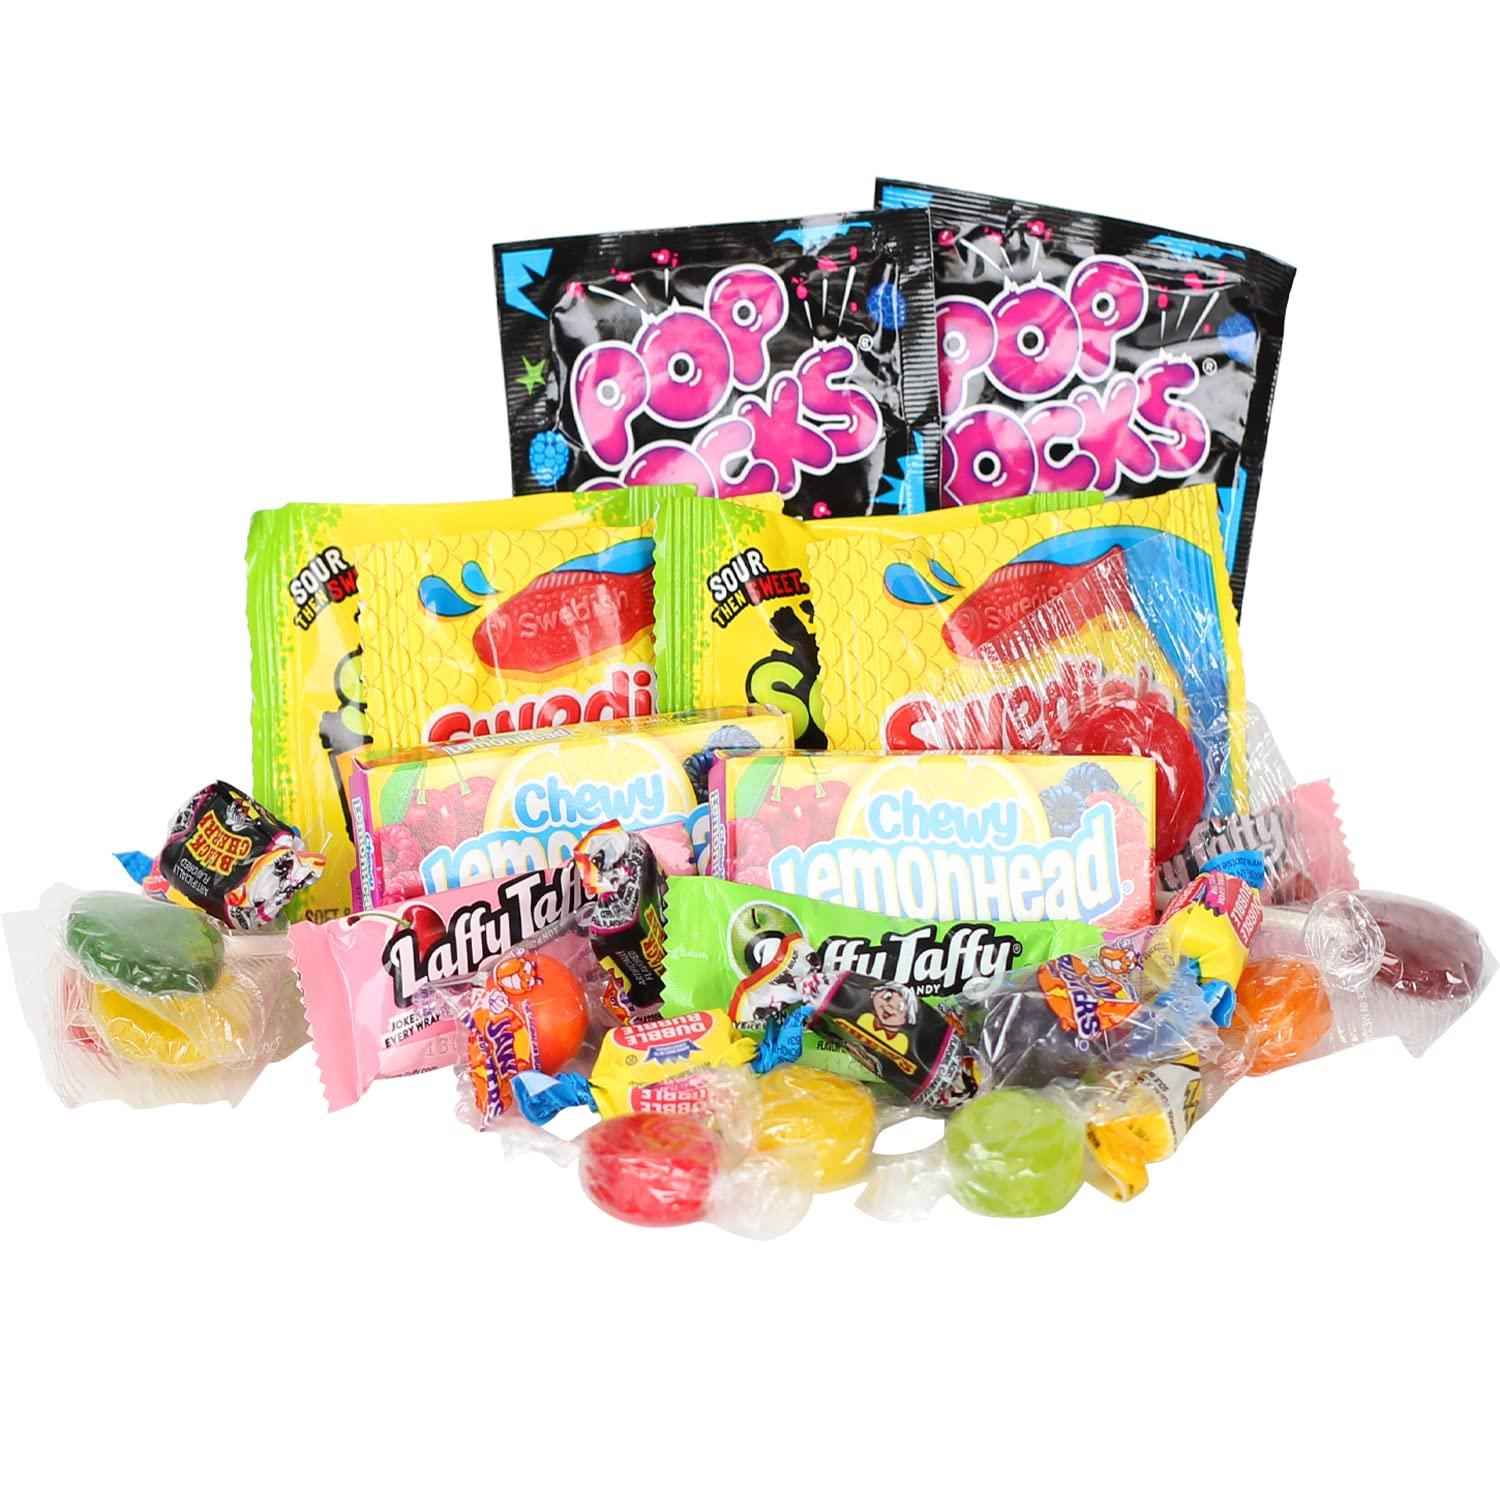 Assorted Candy Mix - Bulk Candies - 2 Pounds - Variety Party Pack - Goodie  Bag Stuffers - Pinata Candy - Individually Wrapped